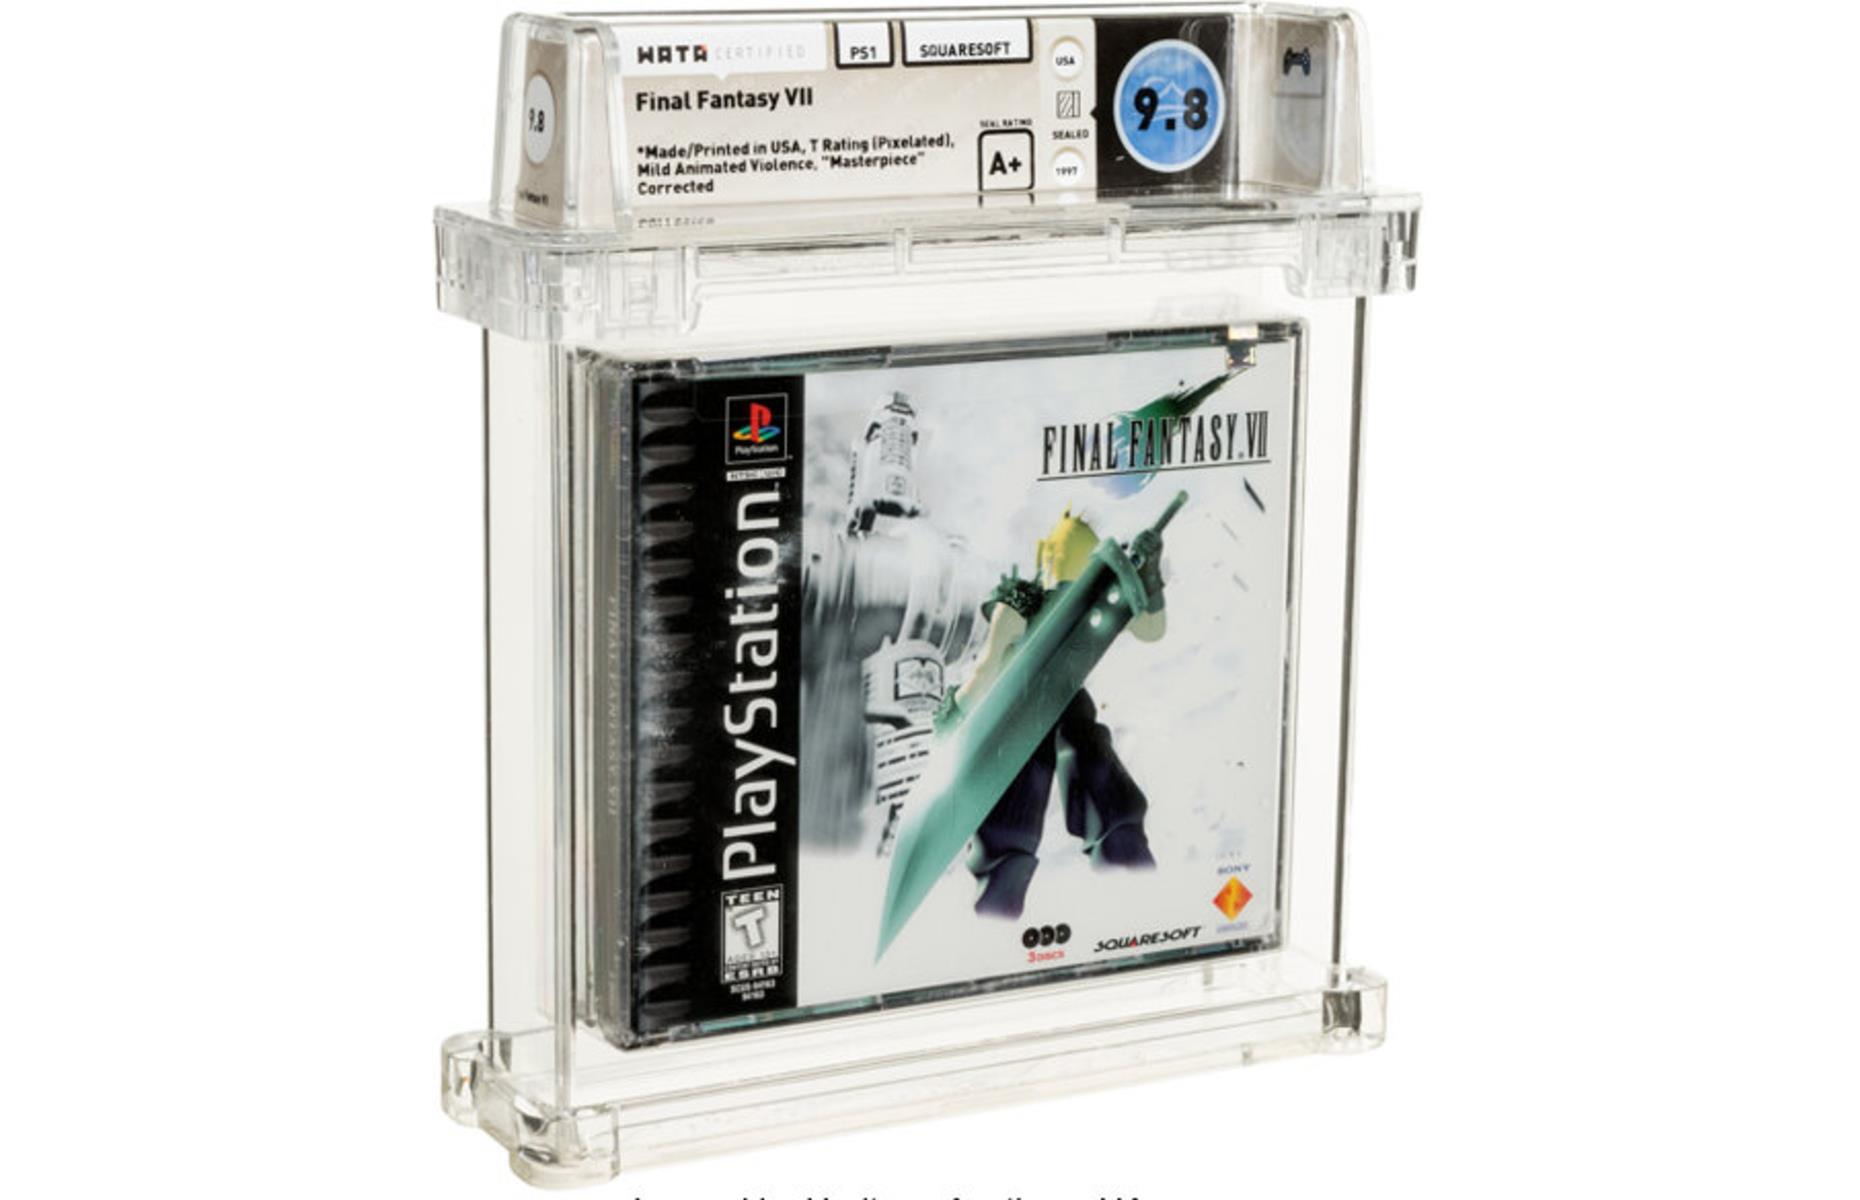 Final Fantasy VII (Sony) for Playstation 1, 1997: up to $144,000 (£105k)